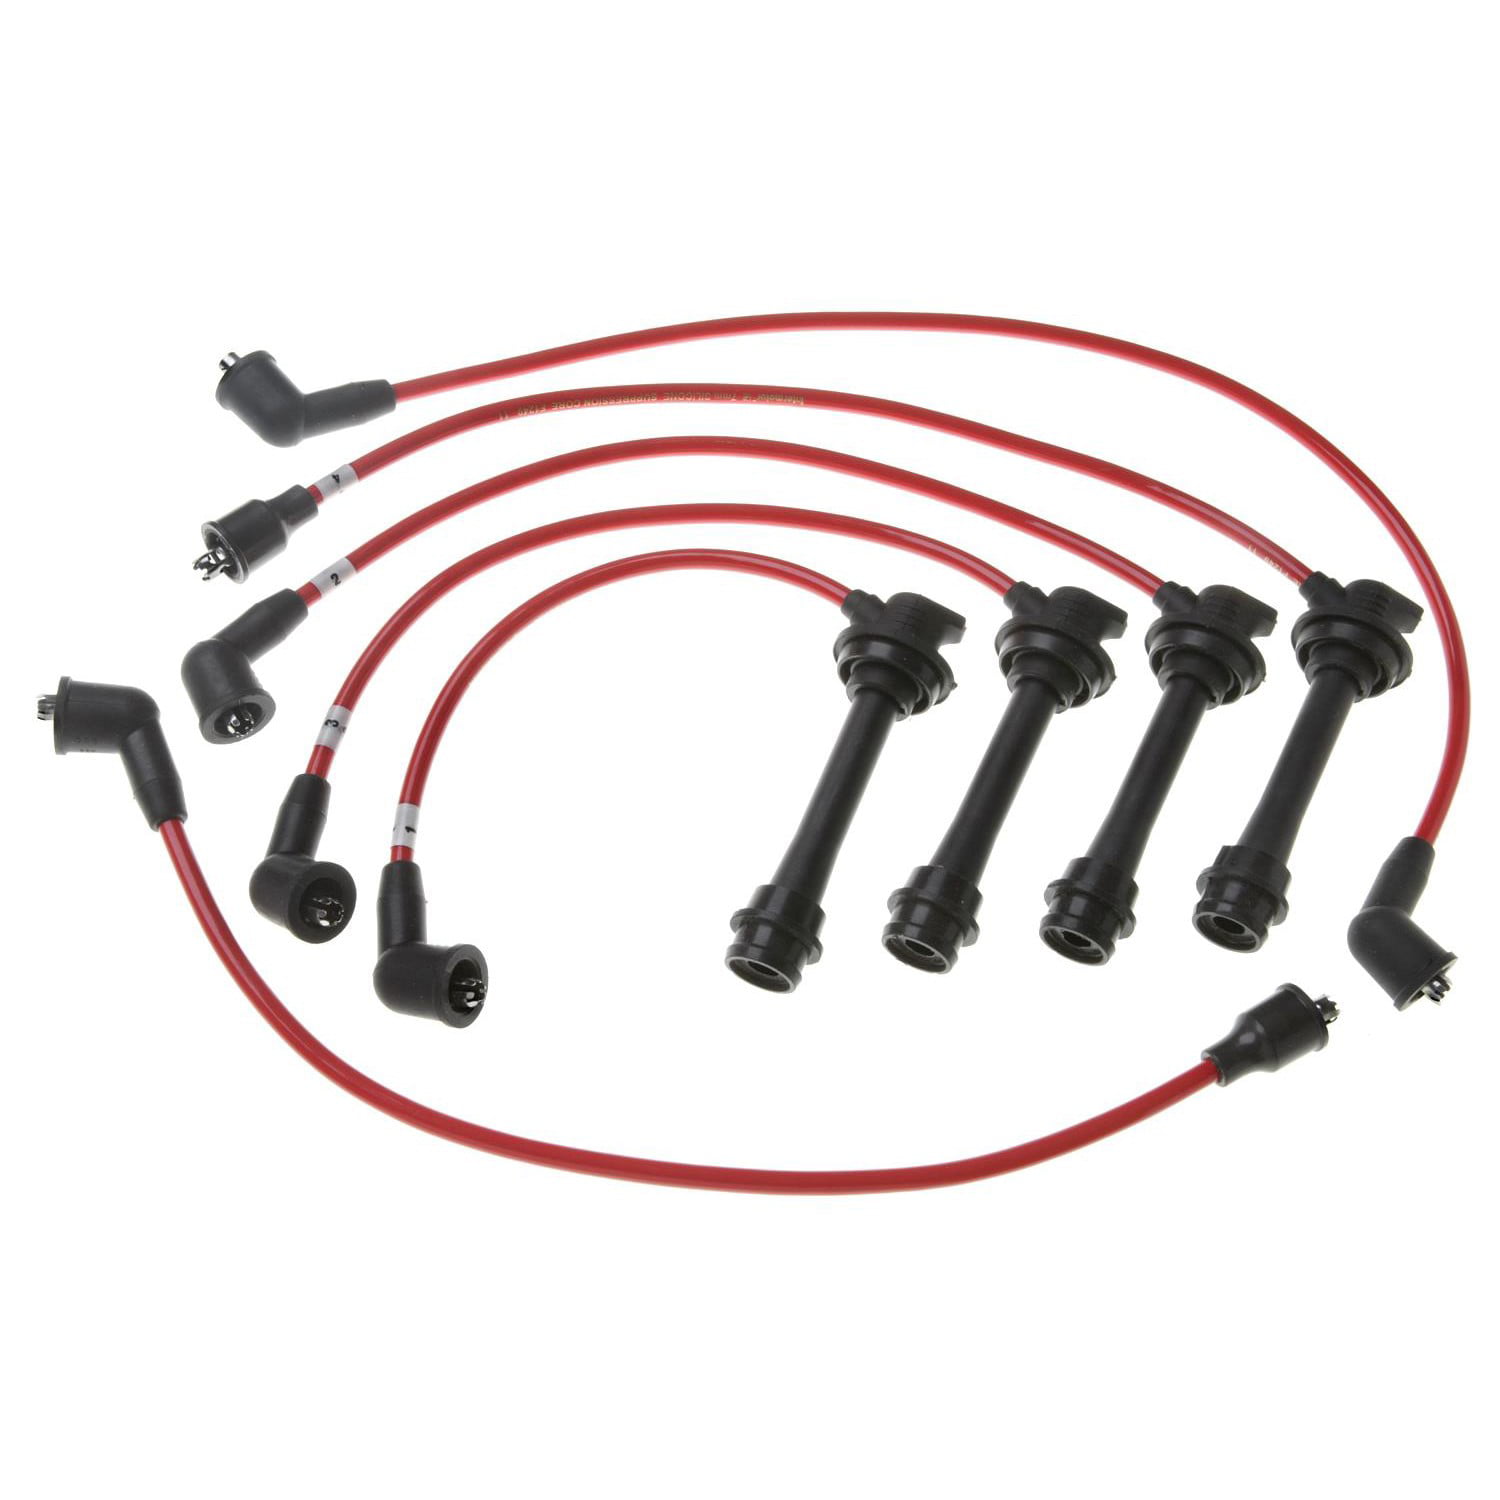 Standard Motor Products 55933 8mm/7mm Silicone Spark Plug Wire Set 